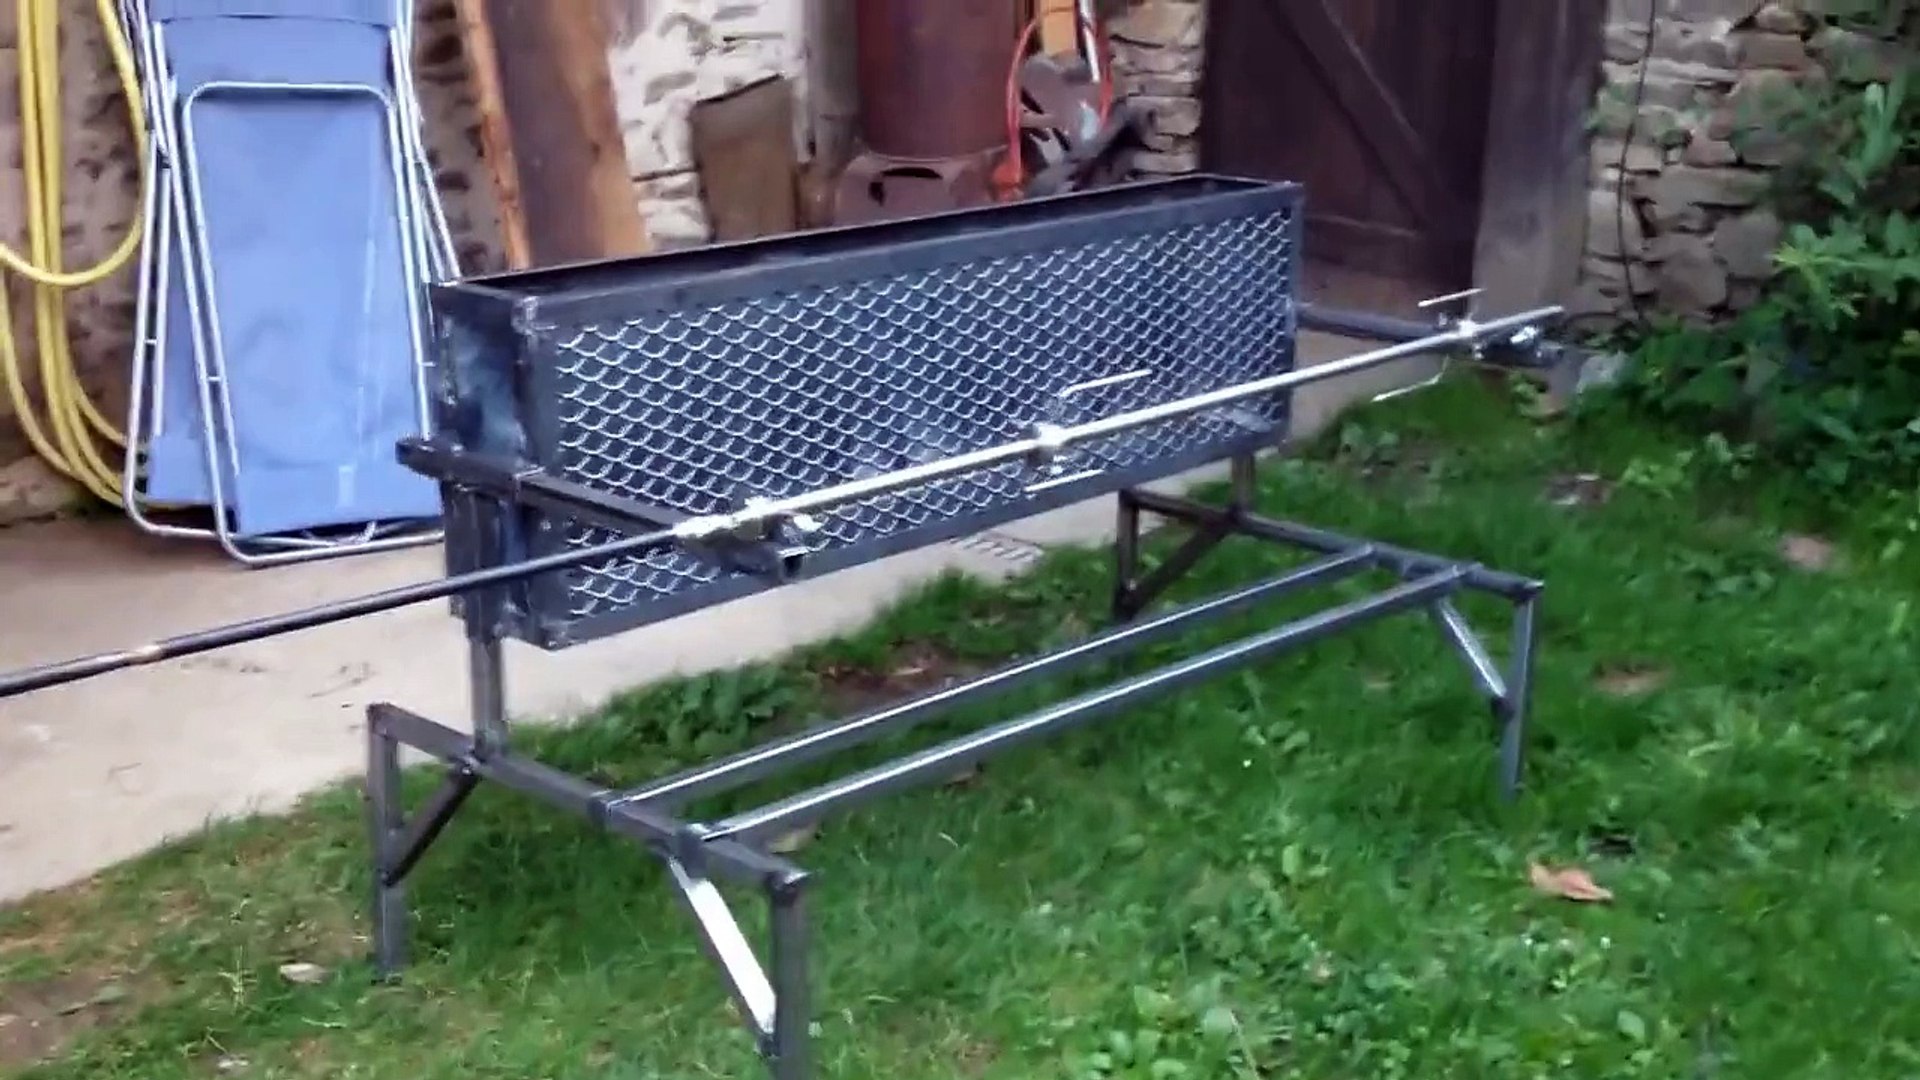 BBQ MECHOUI AVEC MOTEUR ESSUIE GLACE/ WINDSHIELD WIPER MOTOR BARBECUE -  video Dailymotion